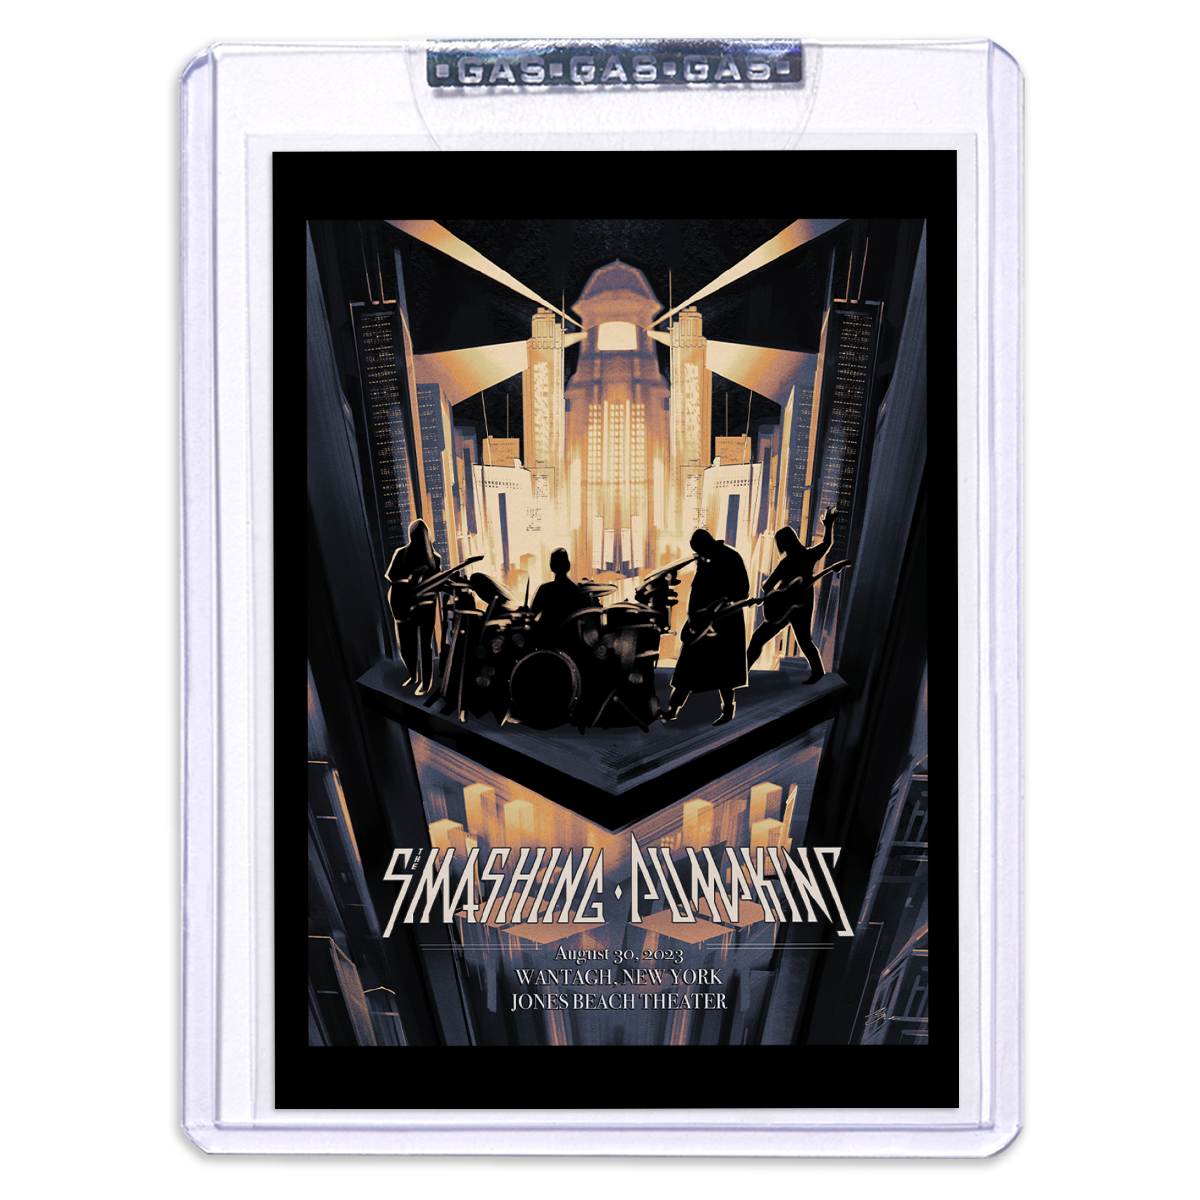 The Smashing Pumpkins Wantagh August 30, 2023 Poster & Setlist Trading Card